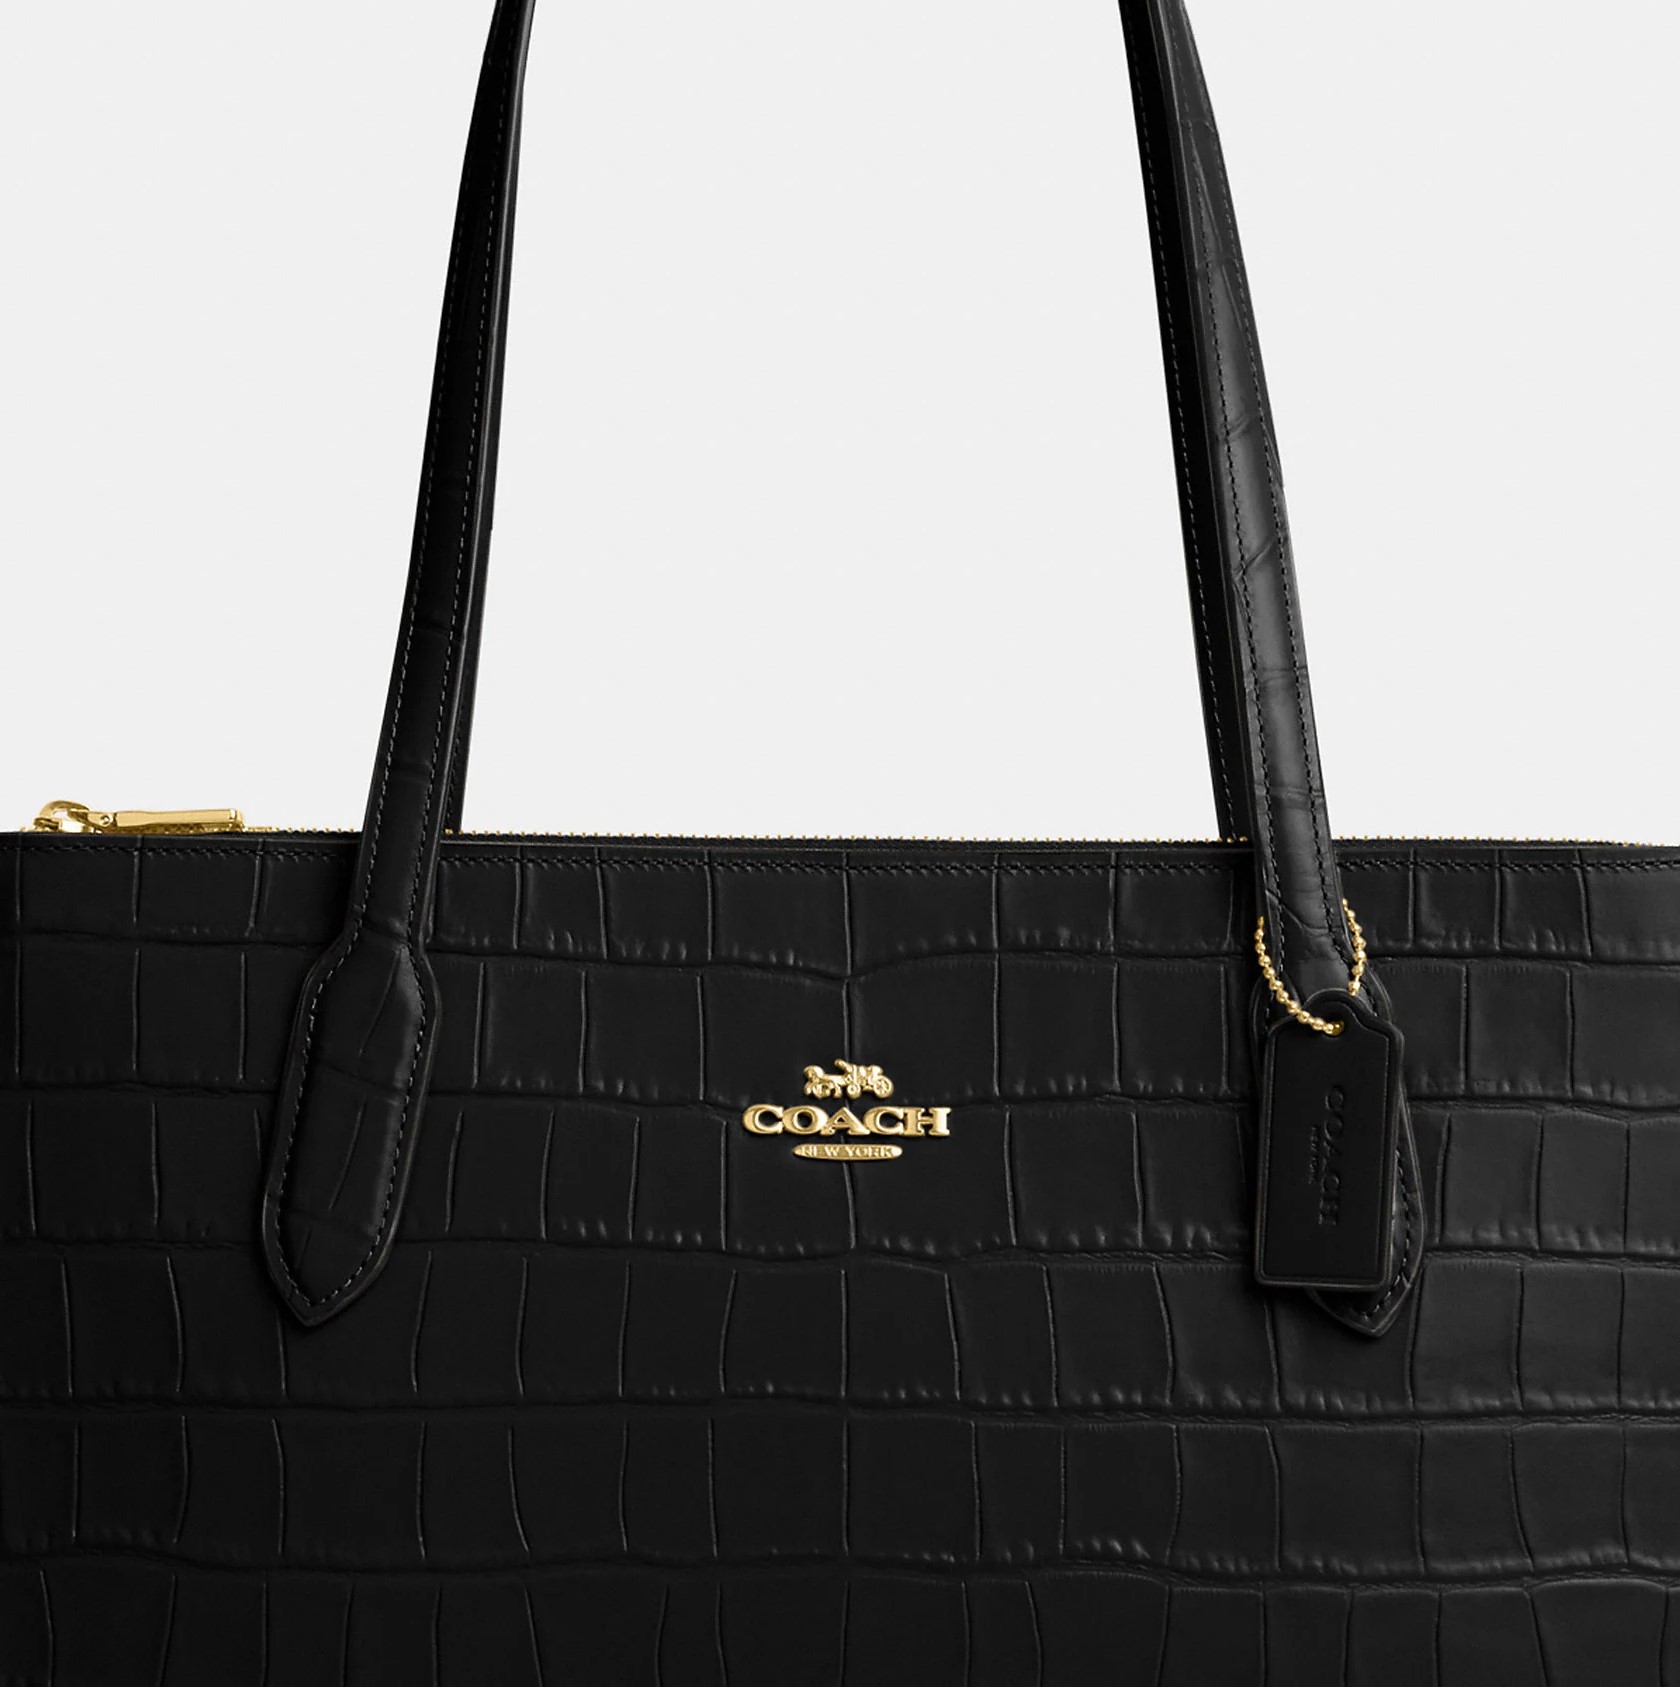 TÚI COACH NỮ NINA TOTE CROCODILE-EMBOSSED LEATHER AND SMOOTH LEATHER BAG IN GOLD BLACK CL654 2